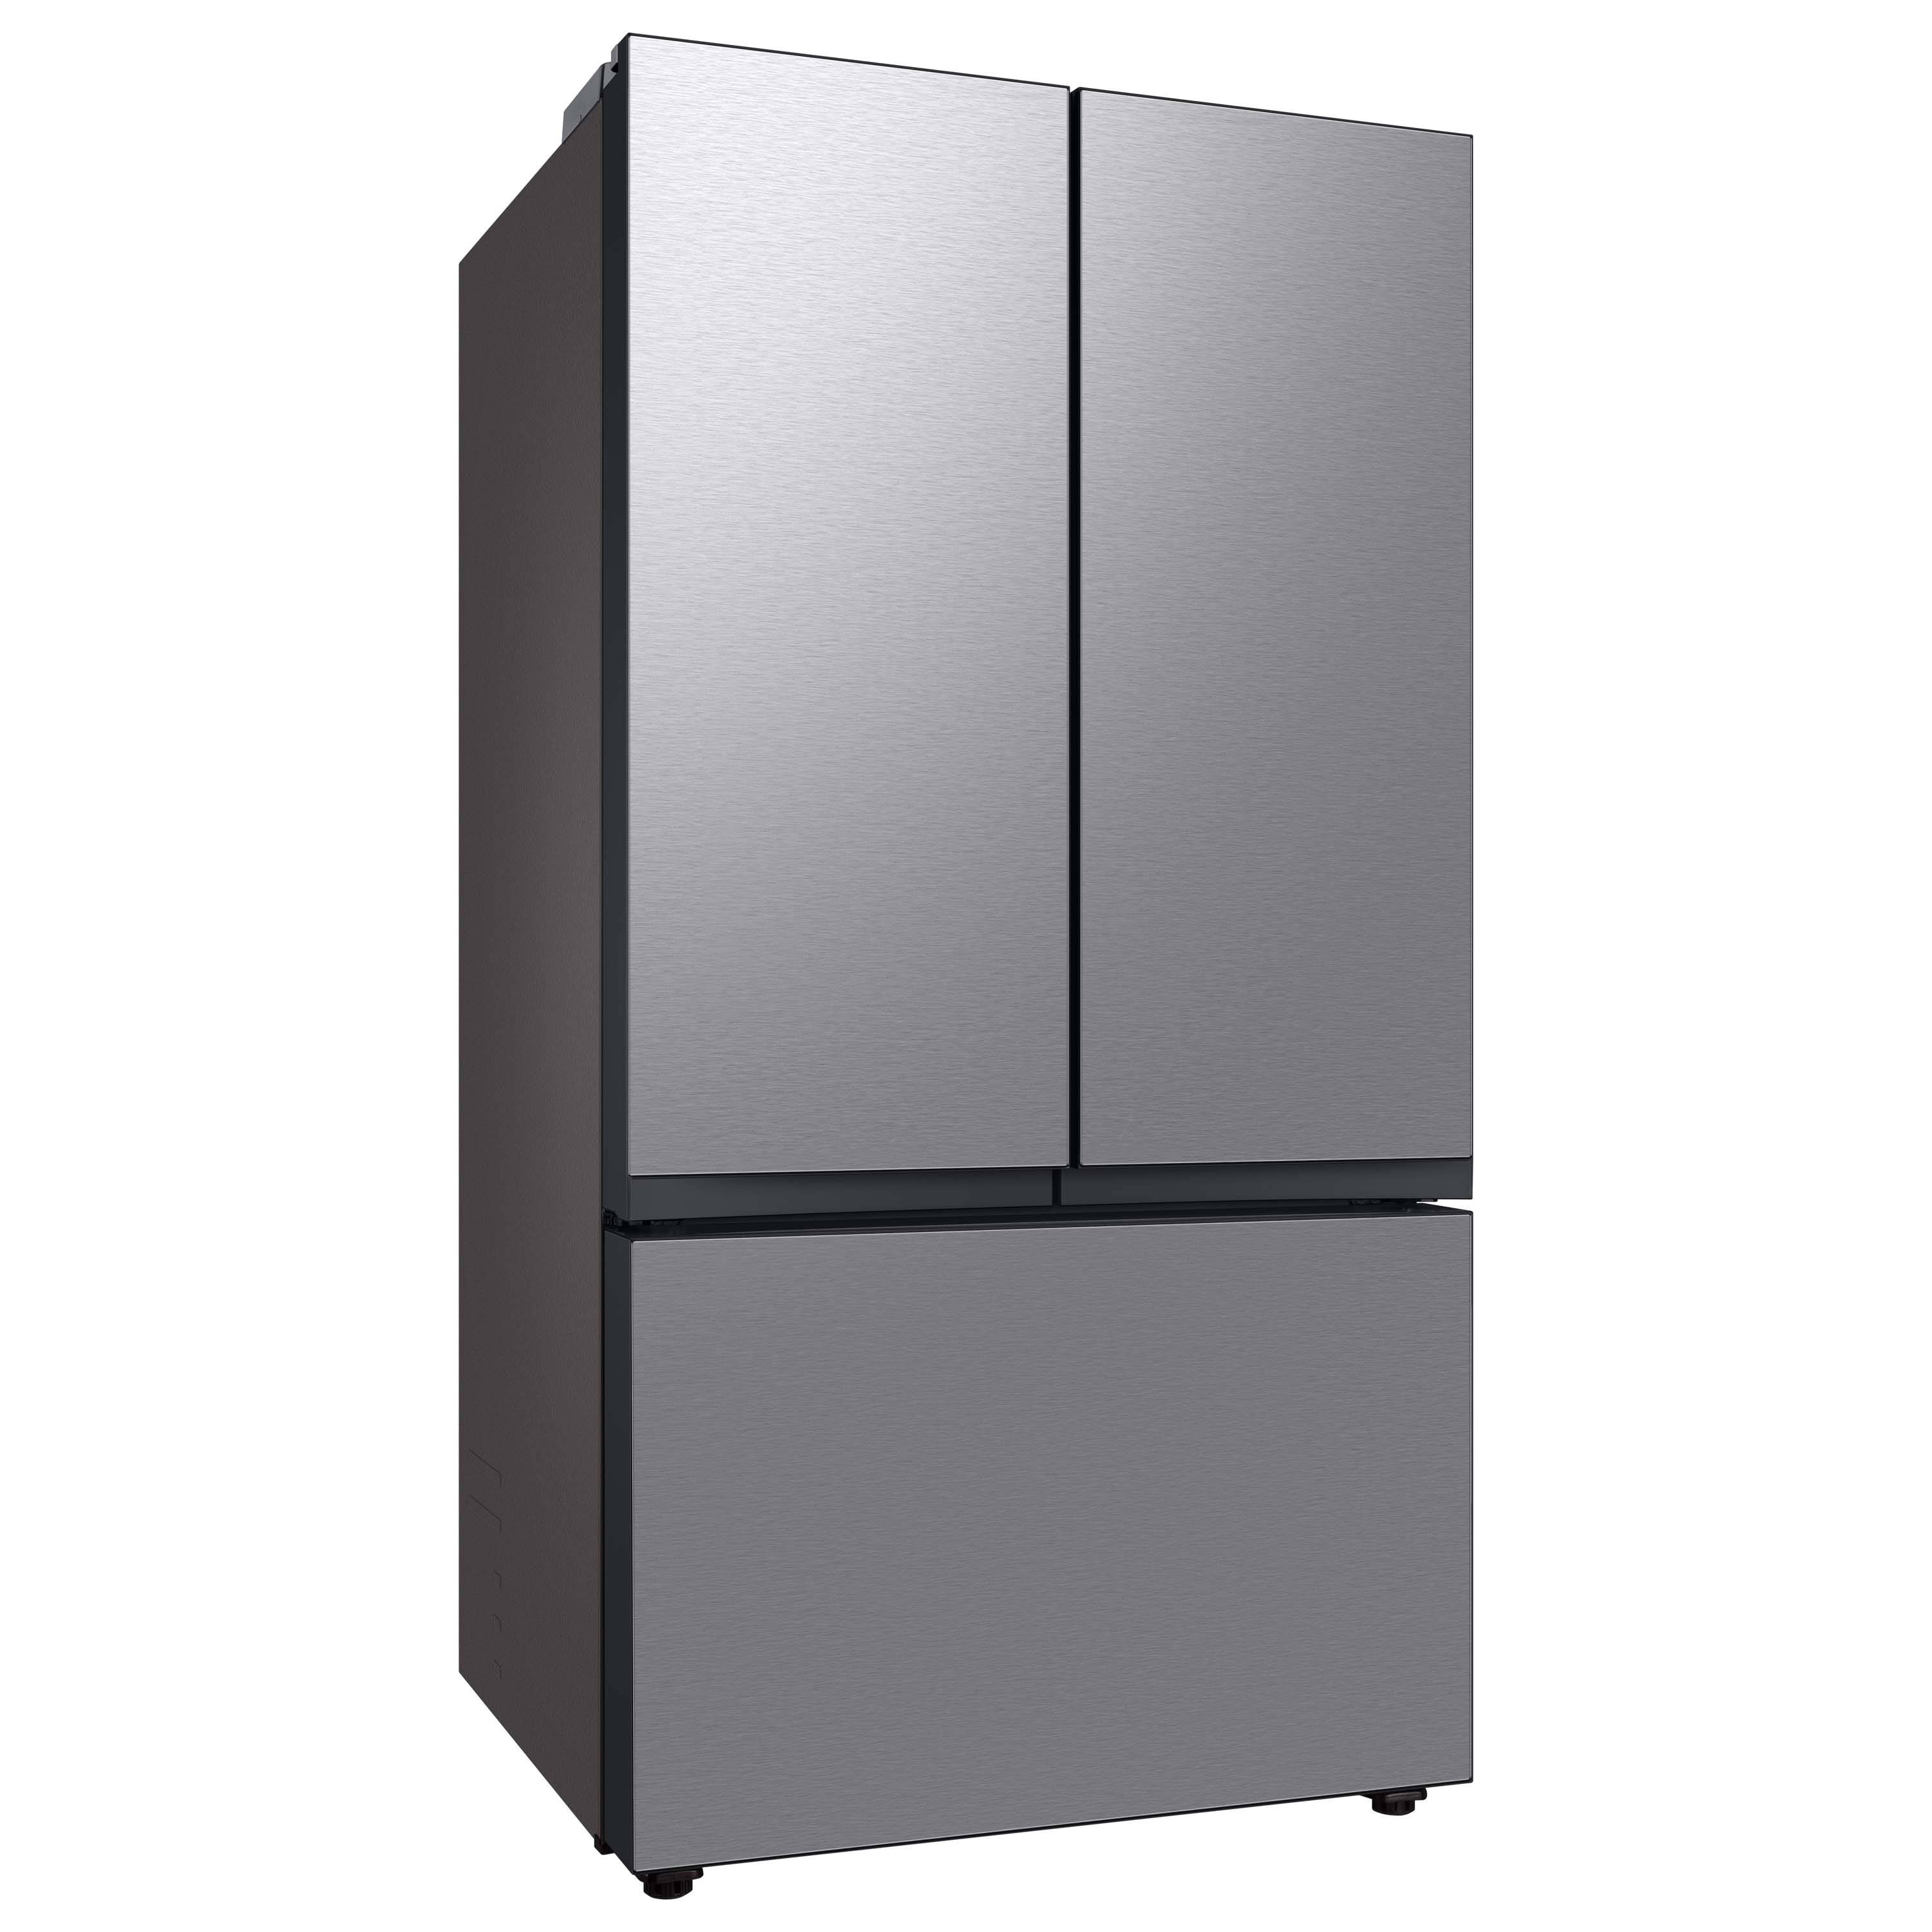 Samsung Bespoke 30.1-cu ft French Door Refrigerator with Dual Ice Maker (Stainless Steel- All Panels) ENERGY STAR